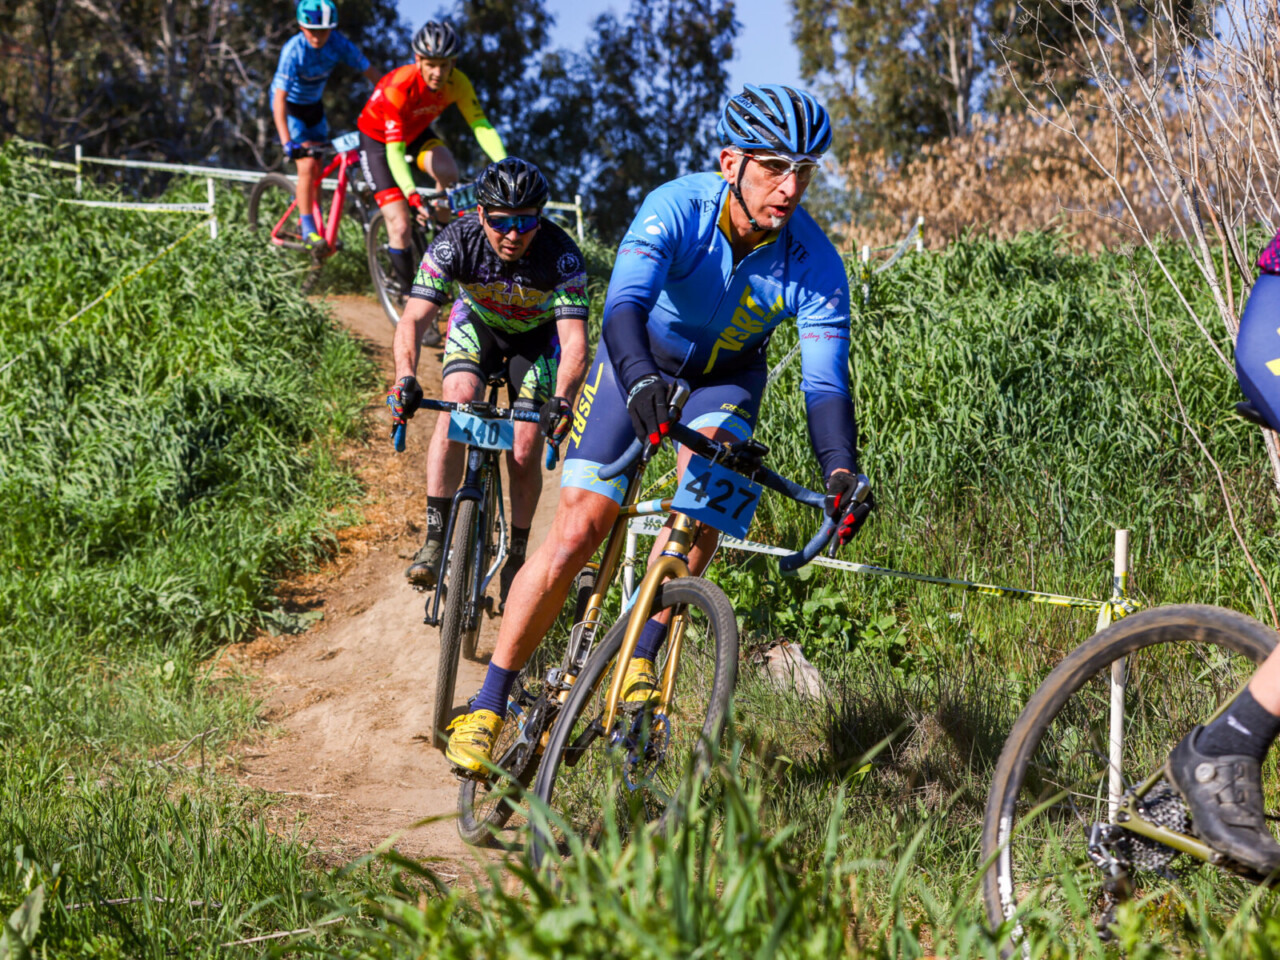 Rockville Cyclocross Series in Fairfield, CA happens each Sunday in January and February at Solano Community College. © J. Silva / Cyclocross Magazine